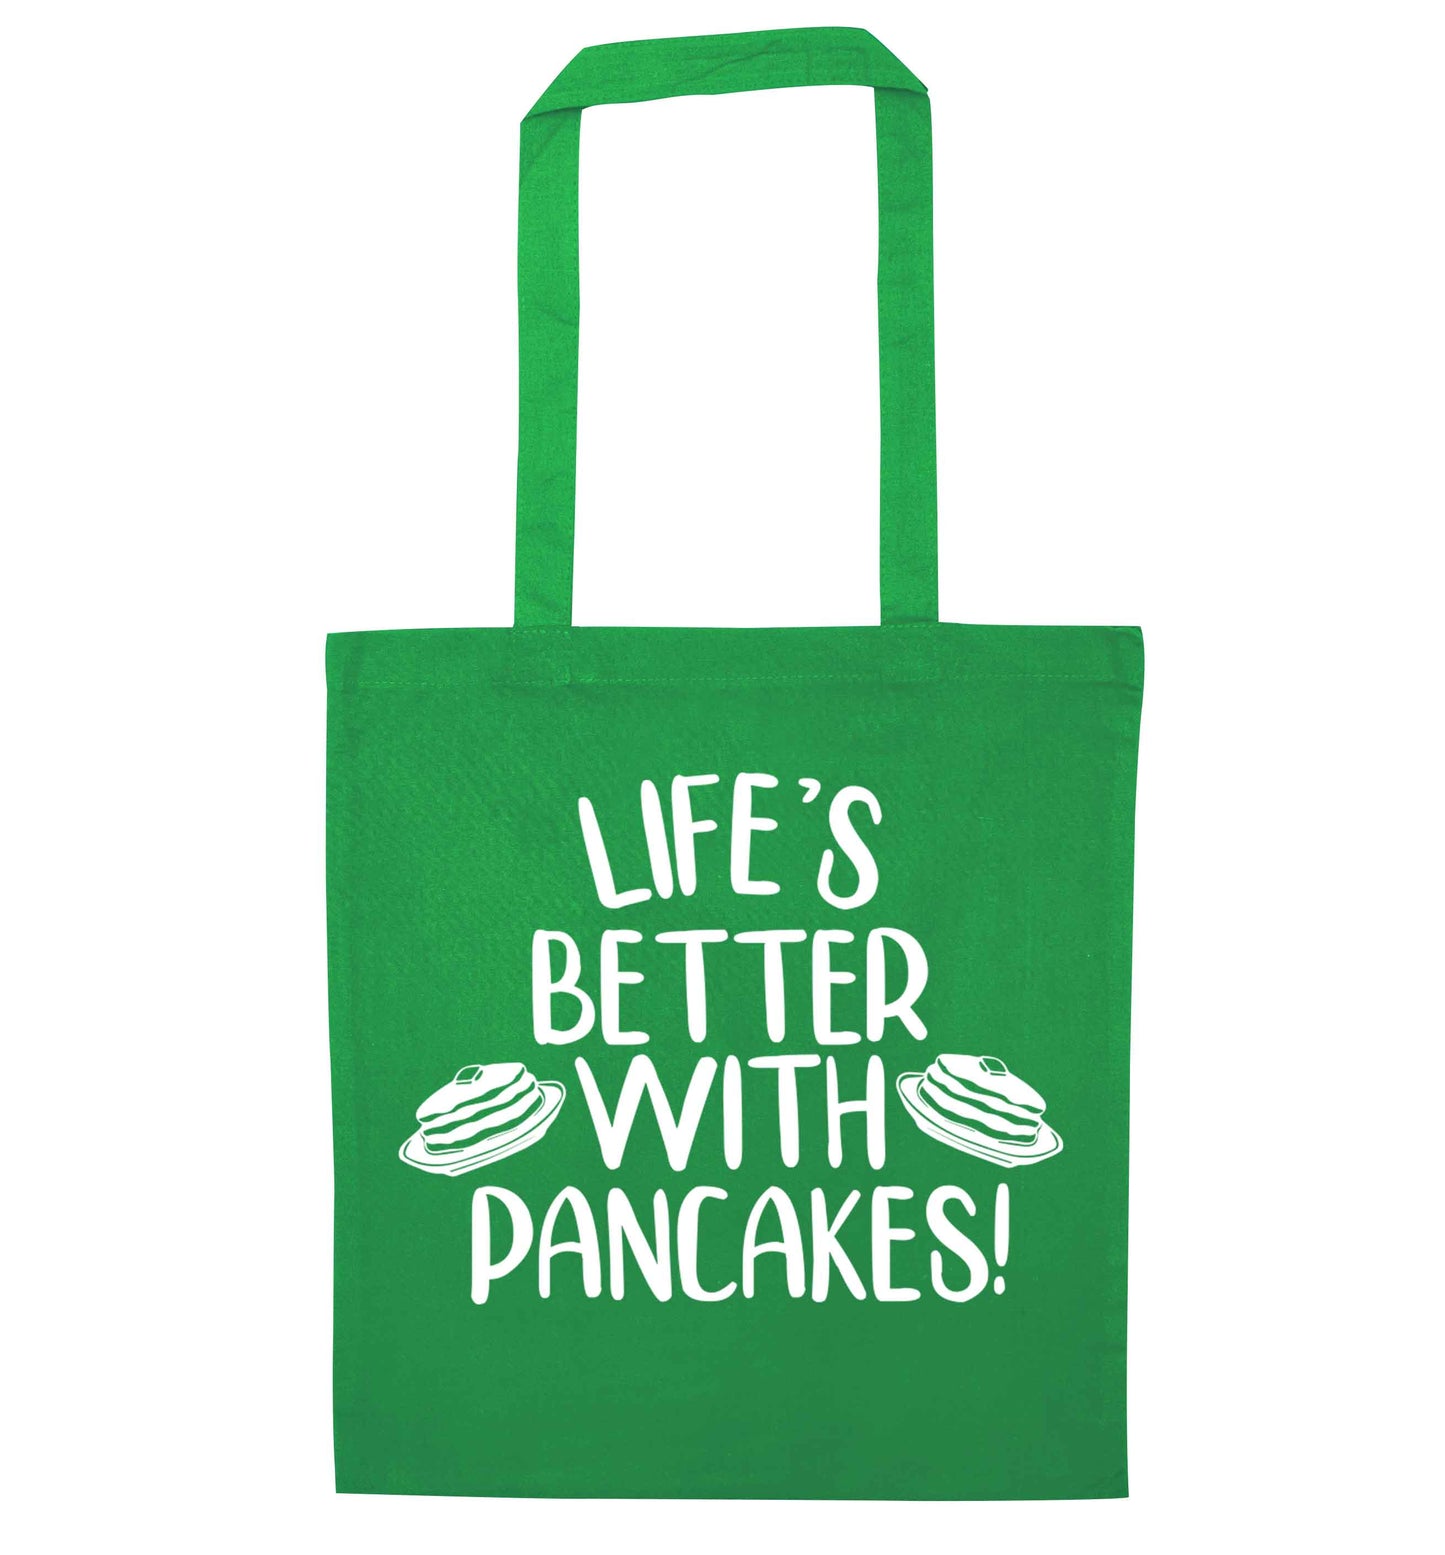 Life's better with pancakes green tote bag